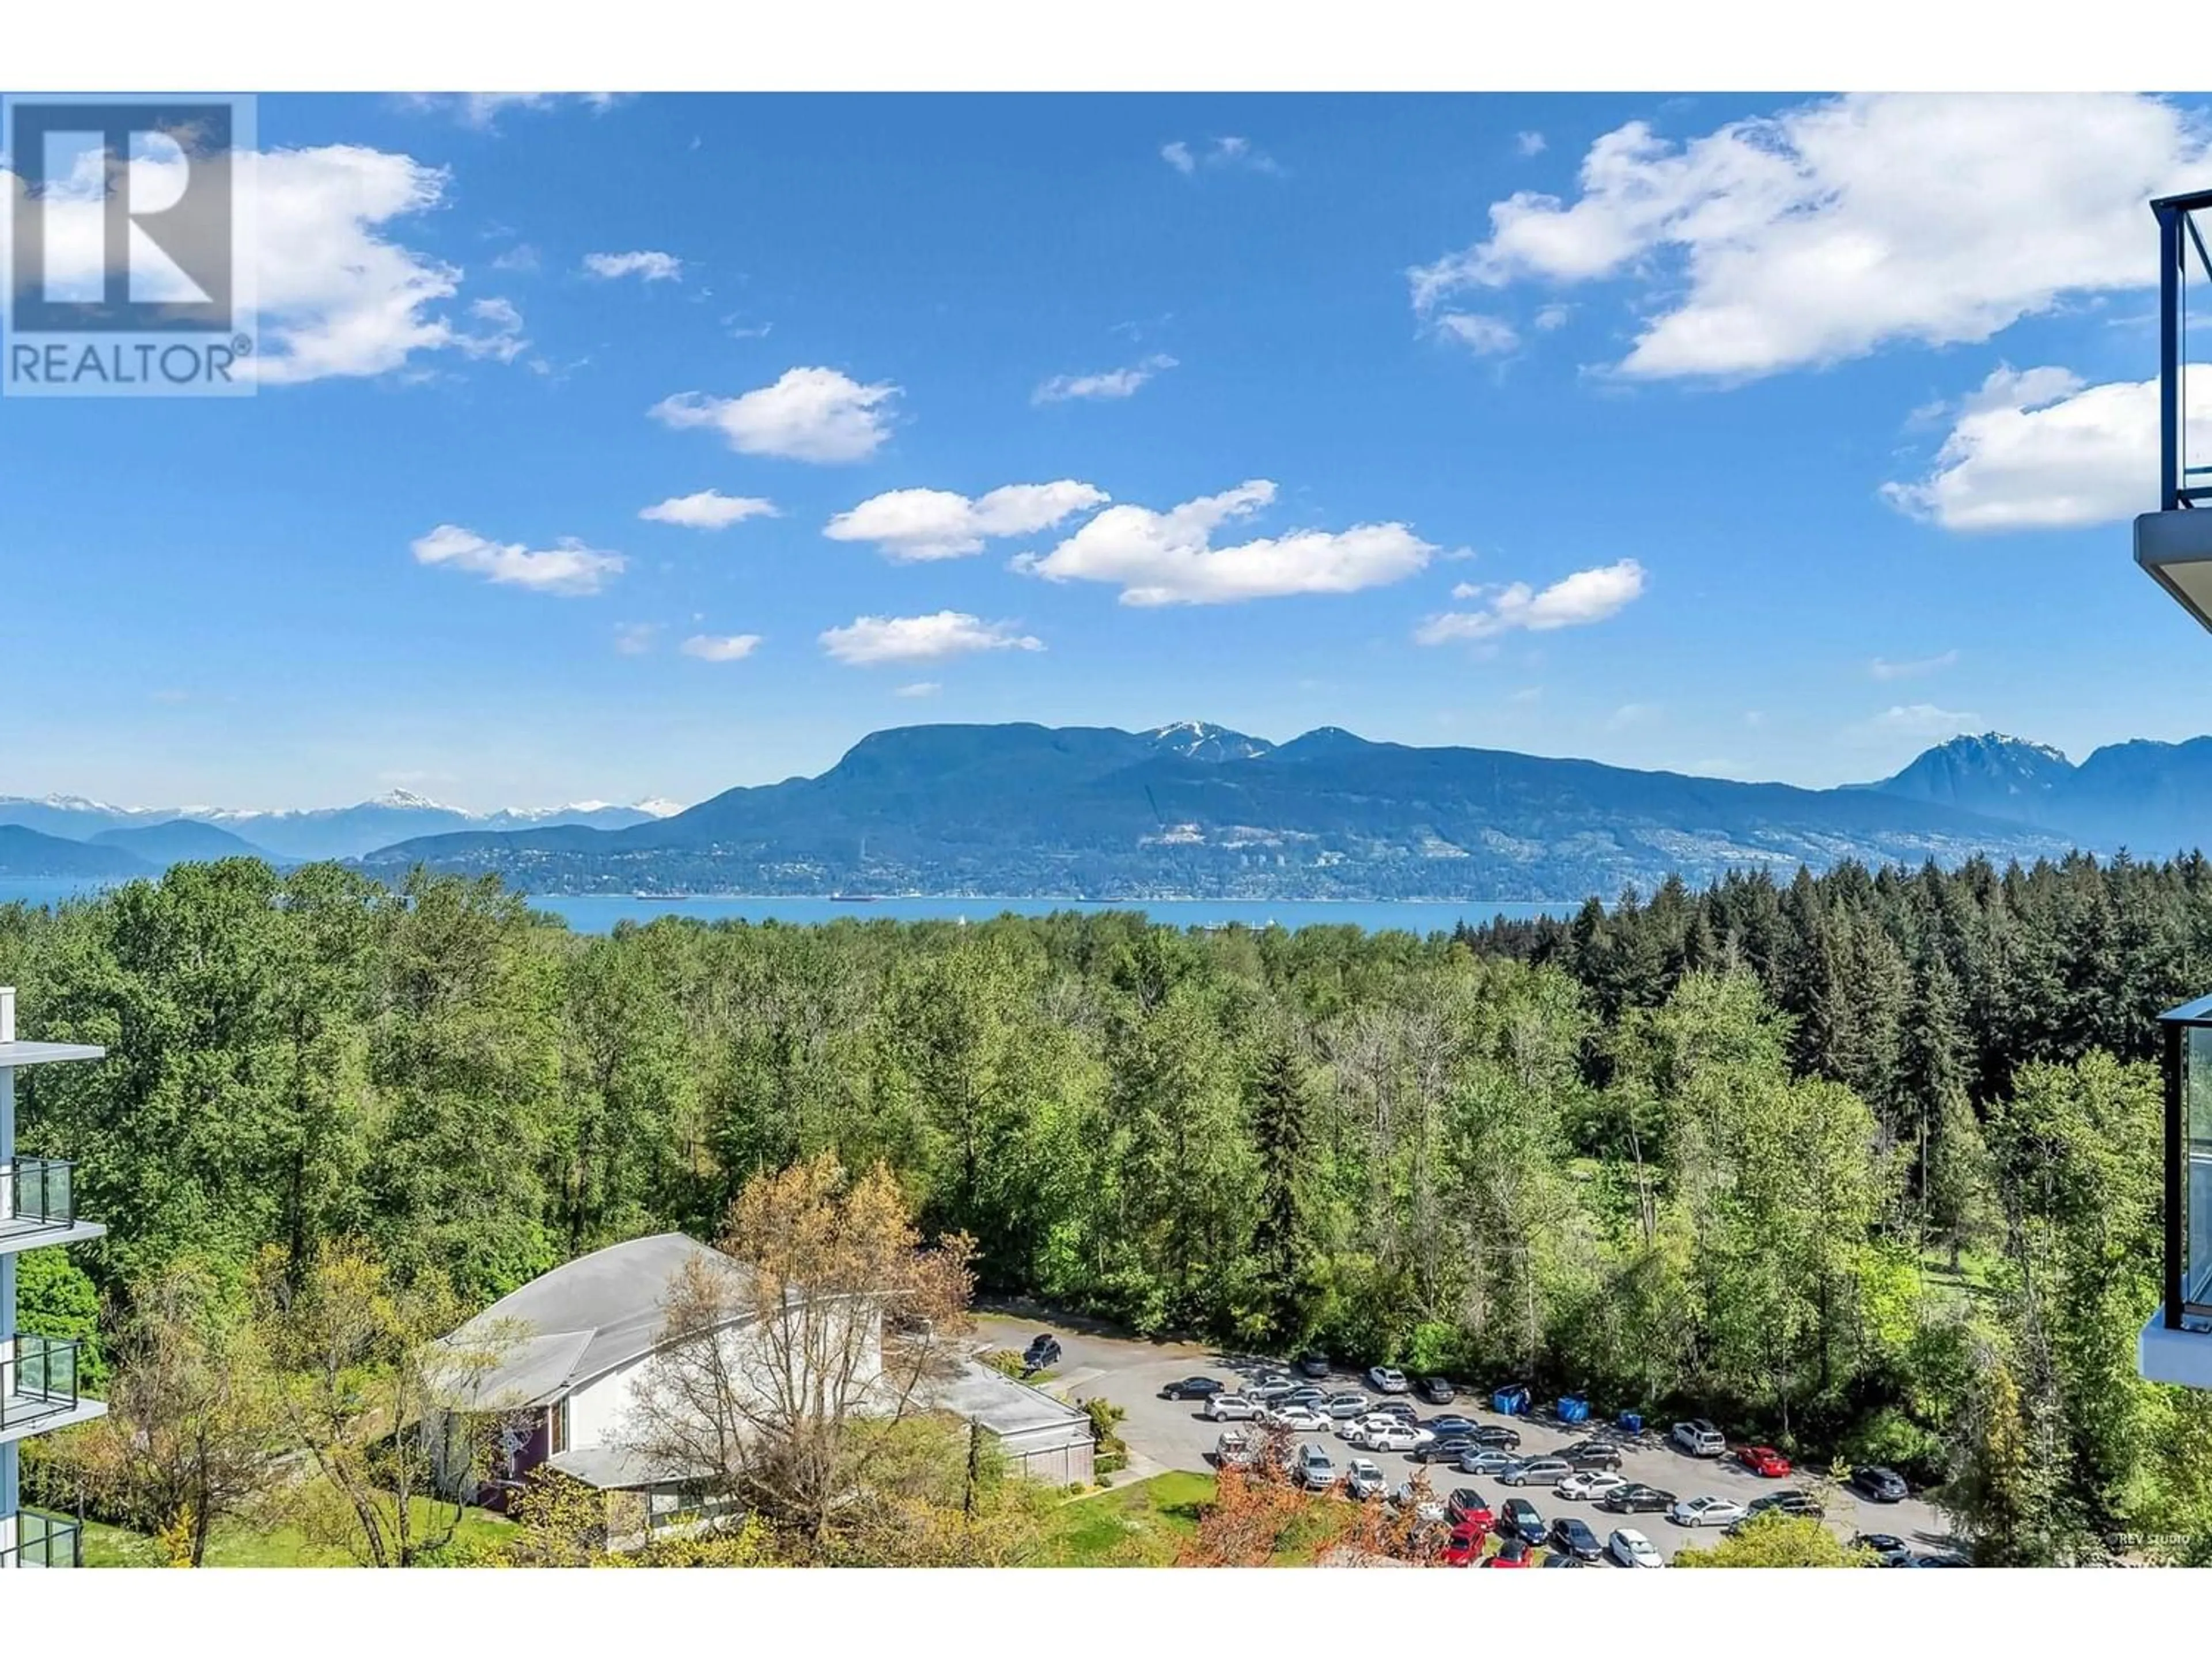 Lakeview for 1405 5410 SHORTCUT ROAD, Vancouver British Columbia V6T0C8